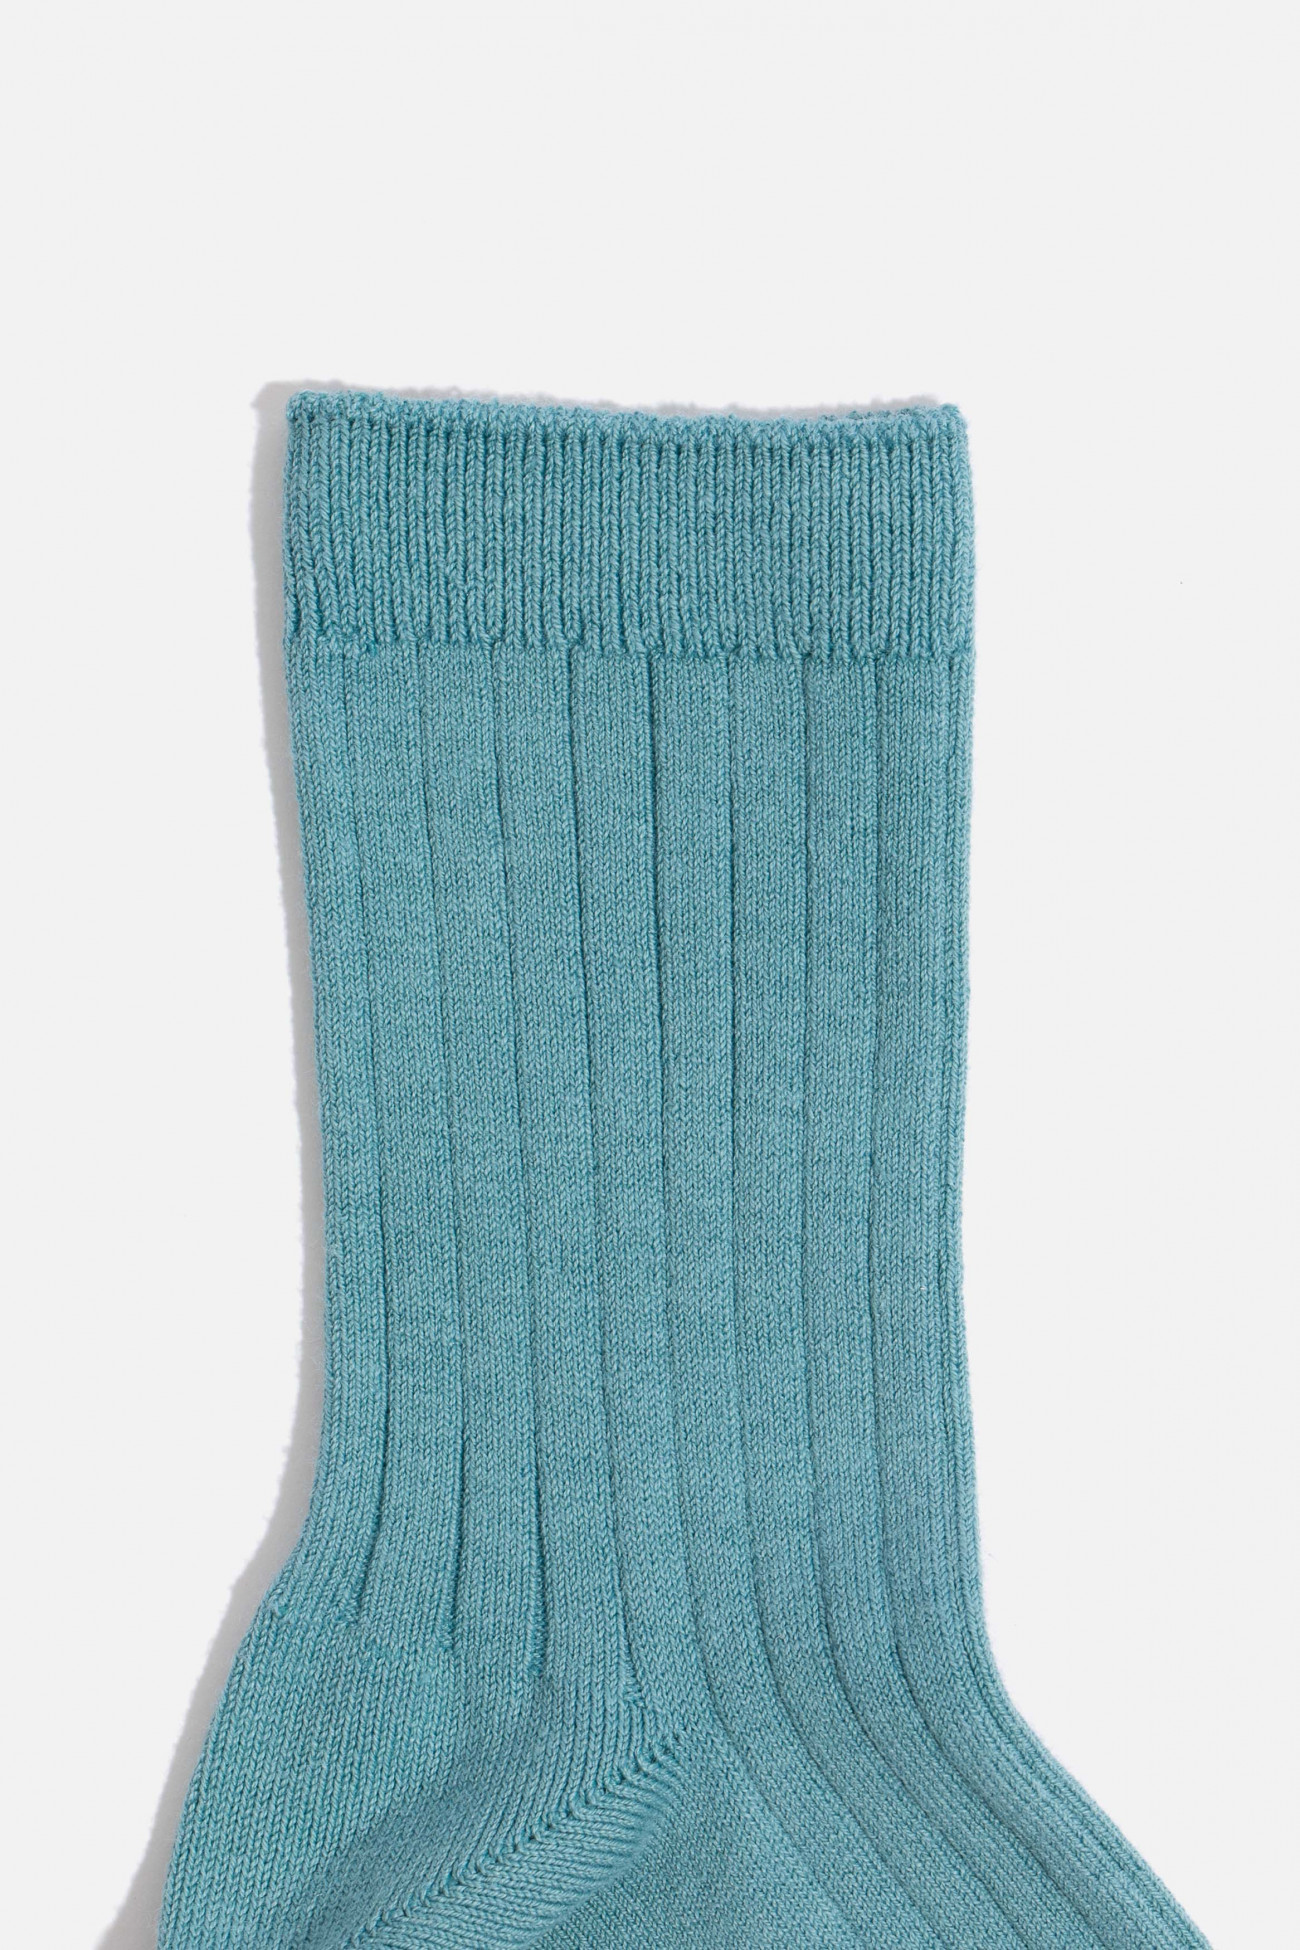 CHAUSSETTES COTELEES AZUL PIEDRA